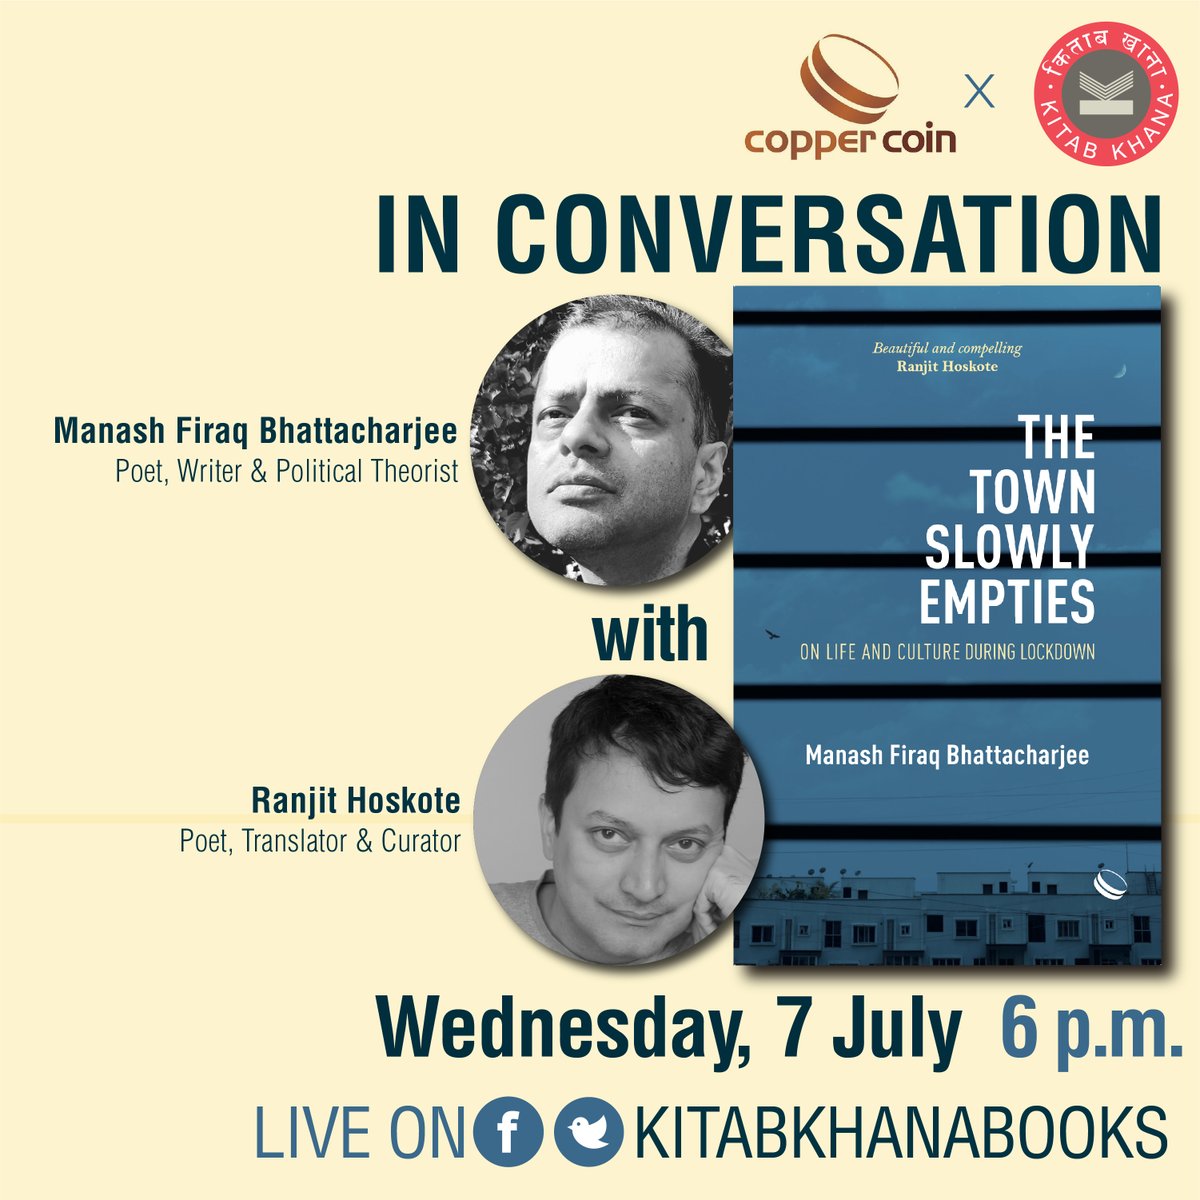 Drawing inspiration from contemporary literature and cinema, #TheTownSlowlyEmpties is a unique window on a world desperate for love, care and hope. Join us tomorrow evening at 6 p.m. as @manasharya speaks with @ranjithoskote on this compelling account.
#digitallaunch #booklaunch